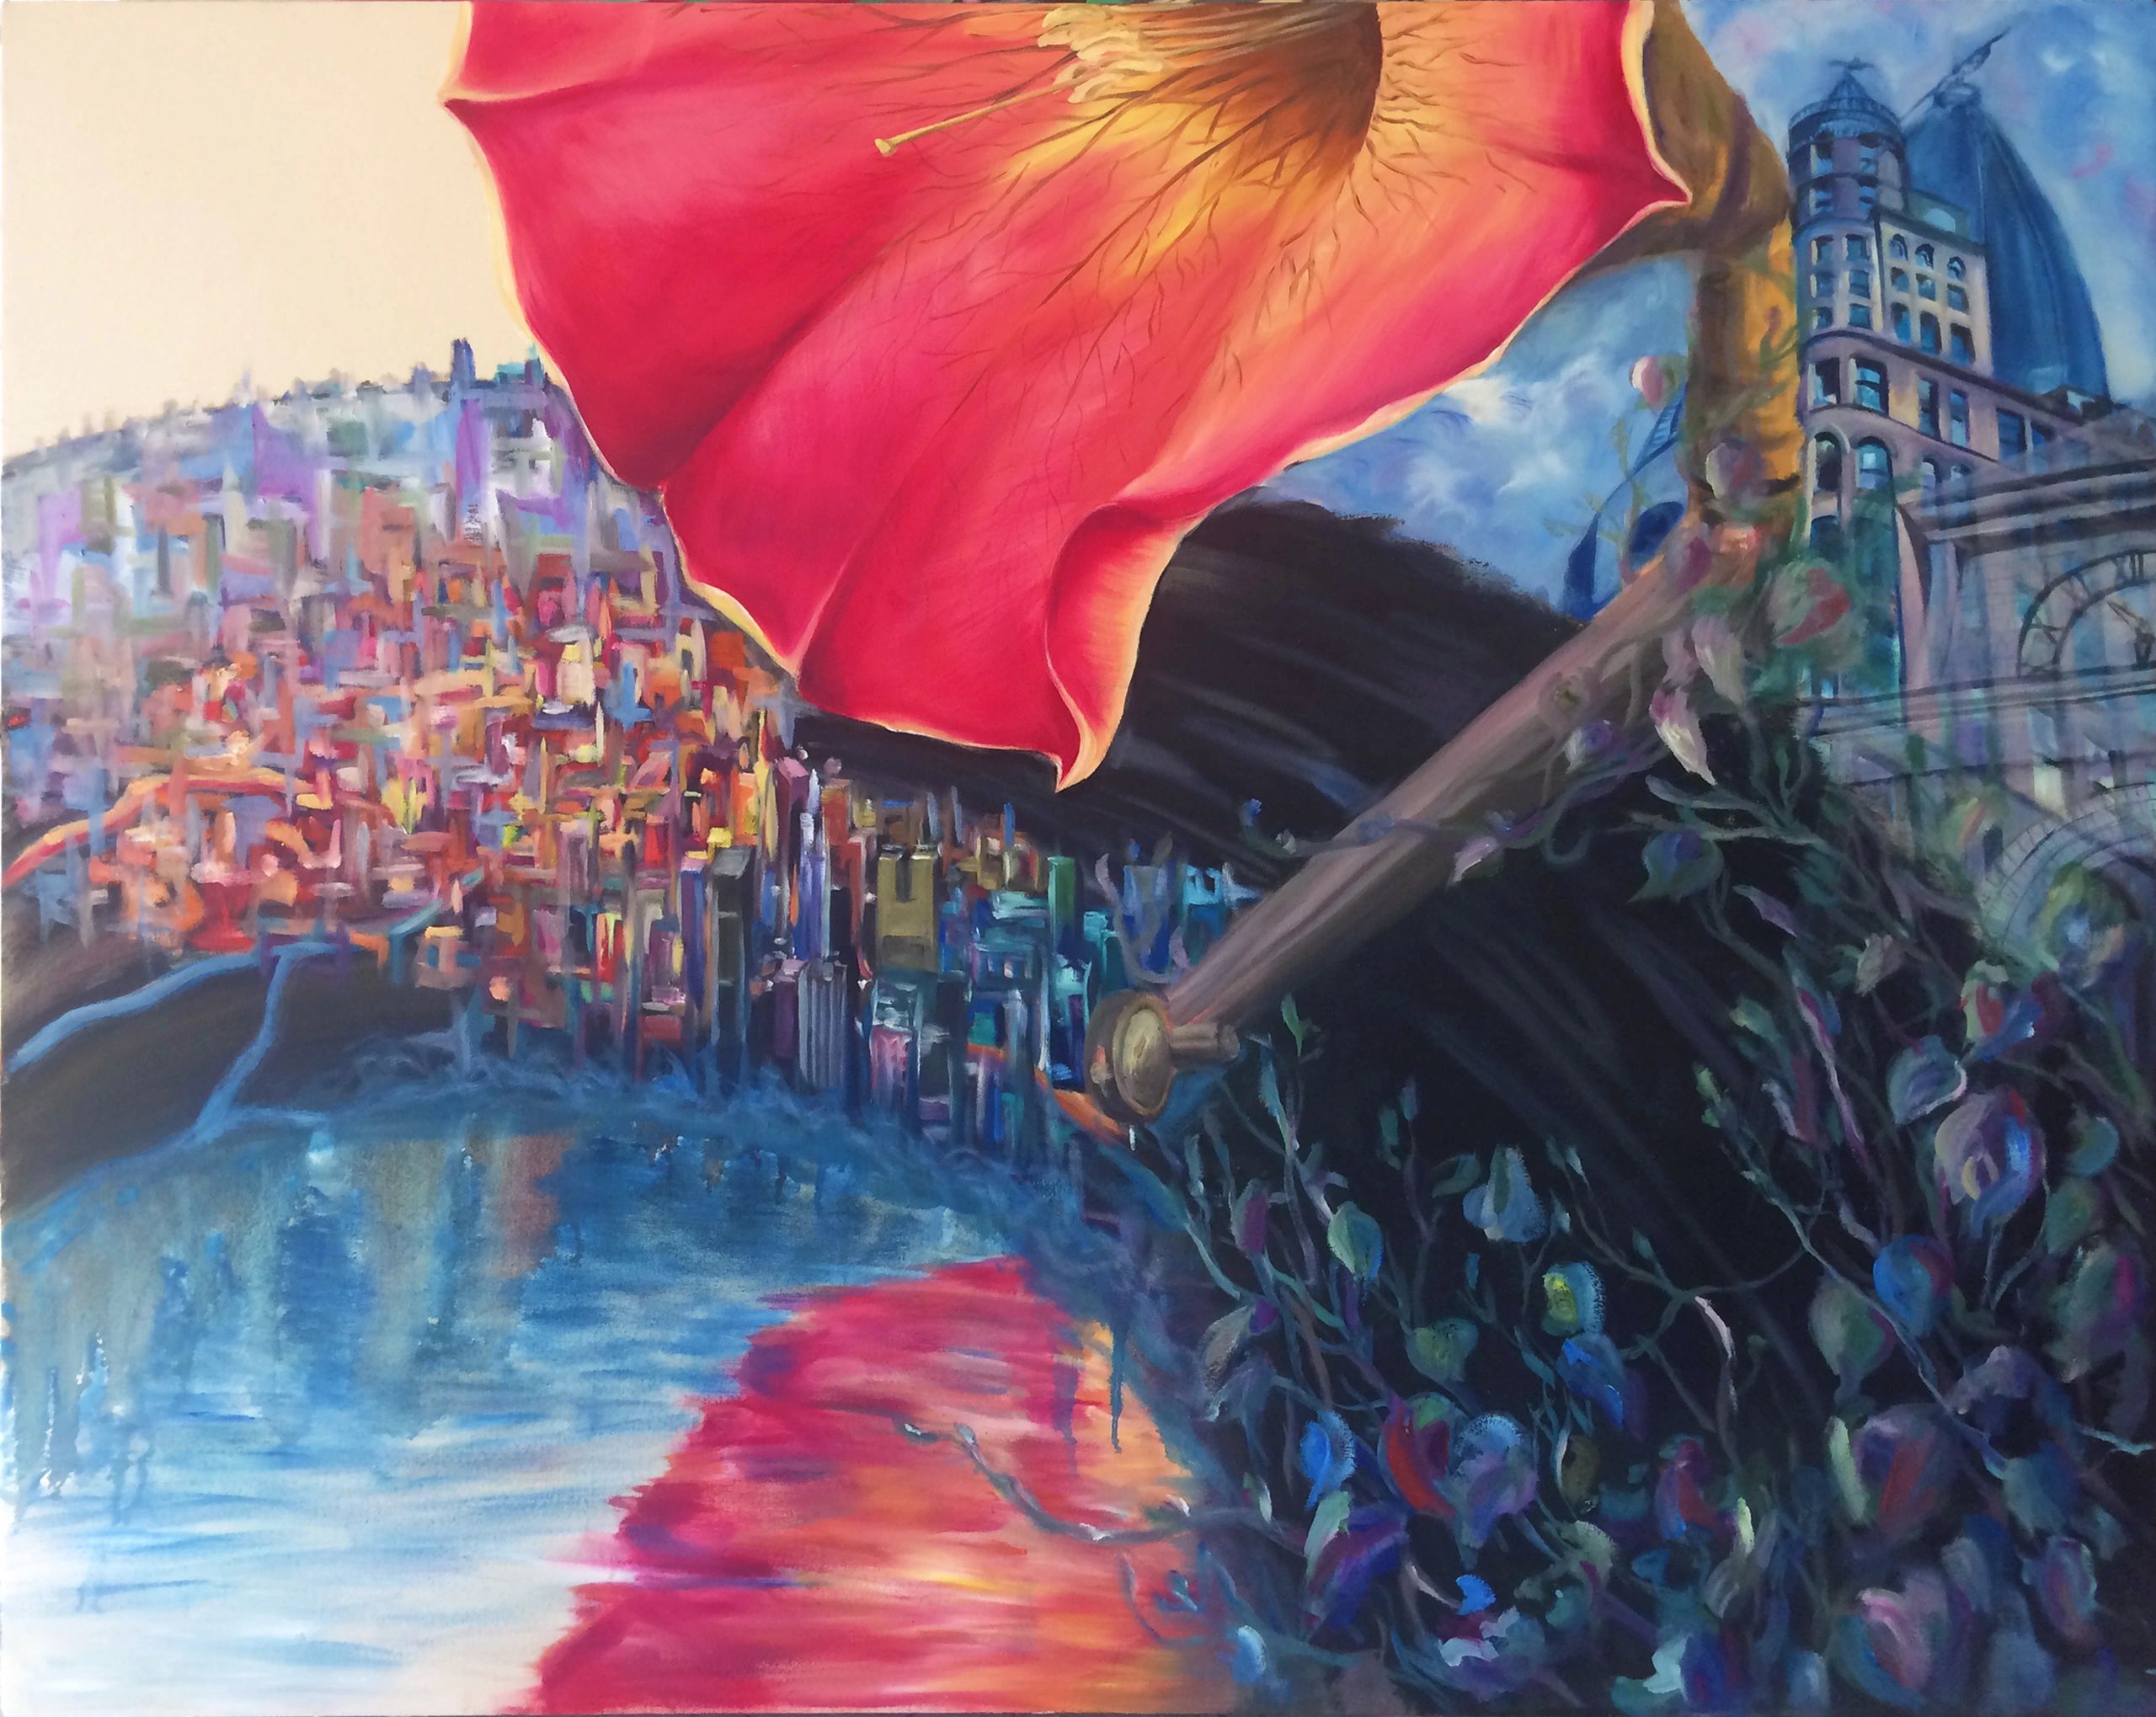 The Blooming Life, oil on canvas